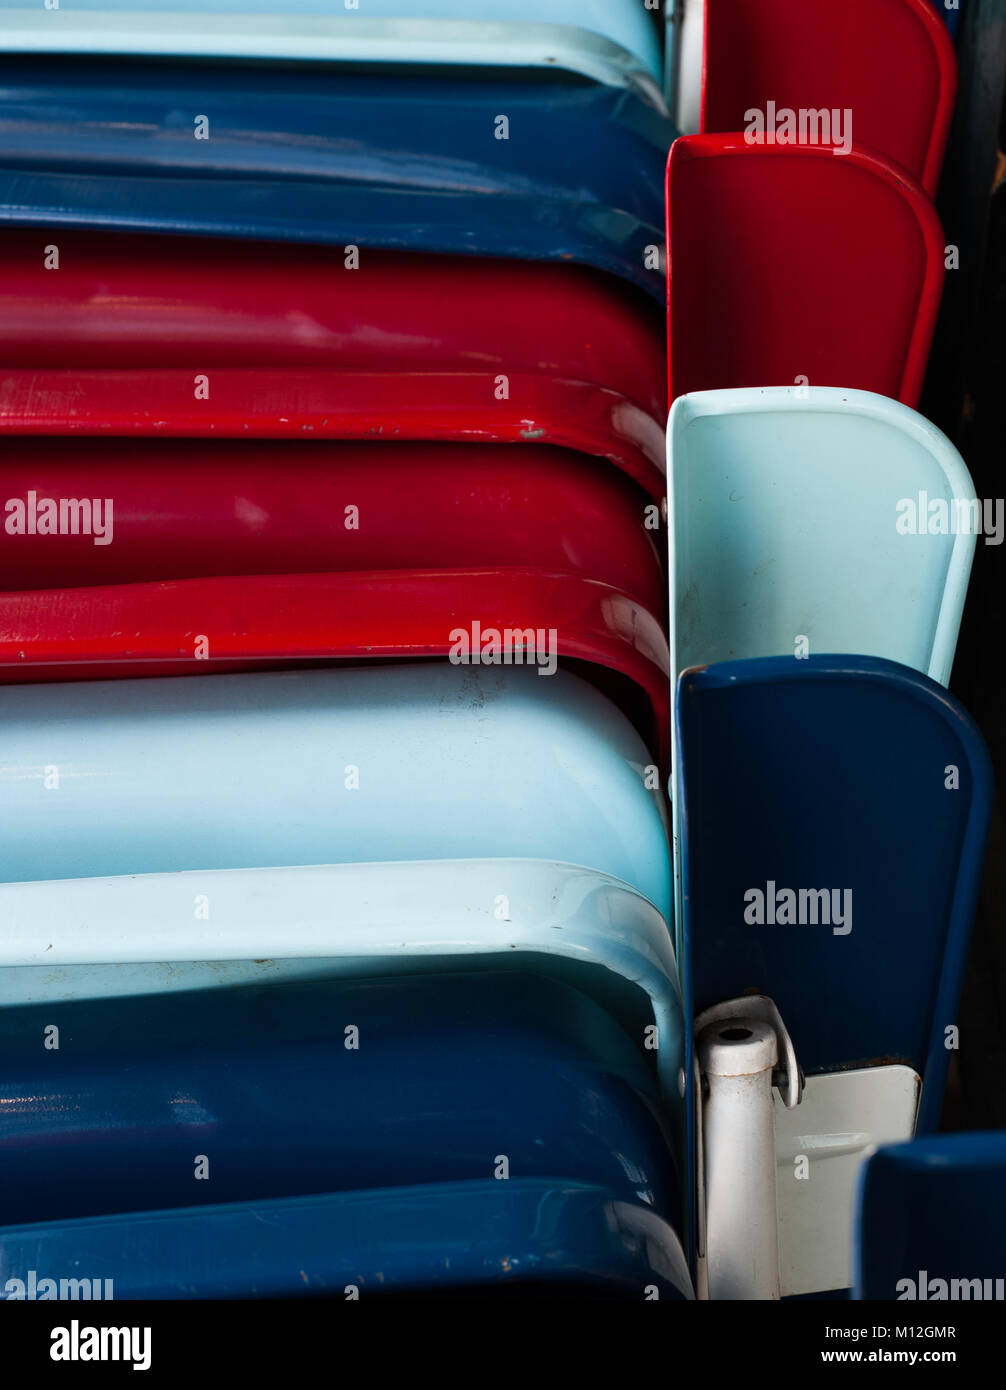 Red white and blue chairs. Stock Photo